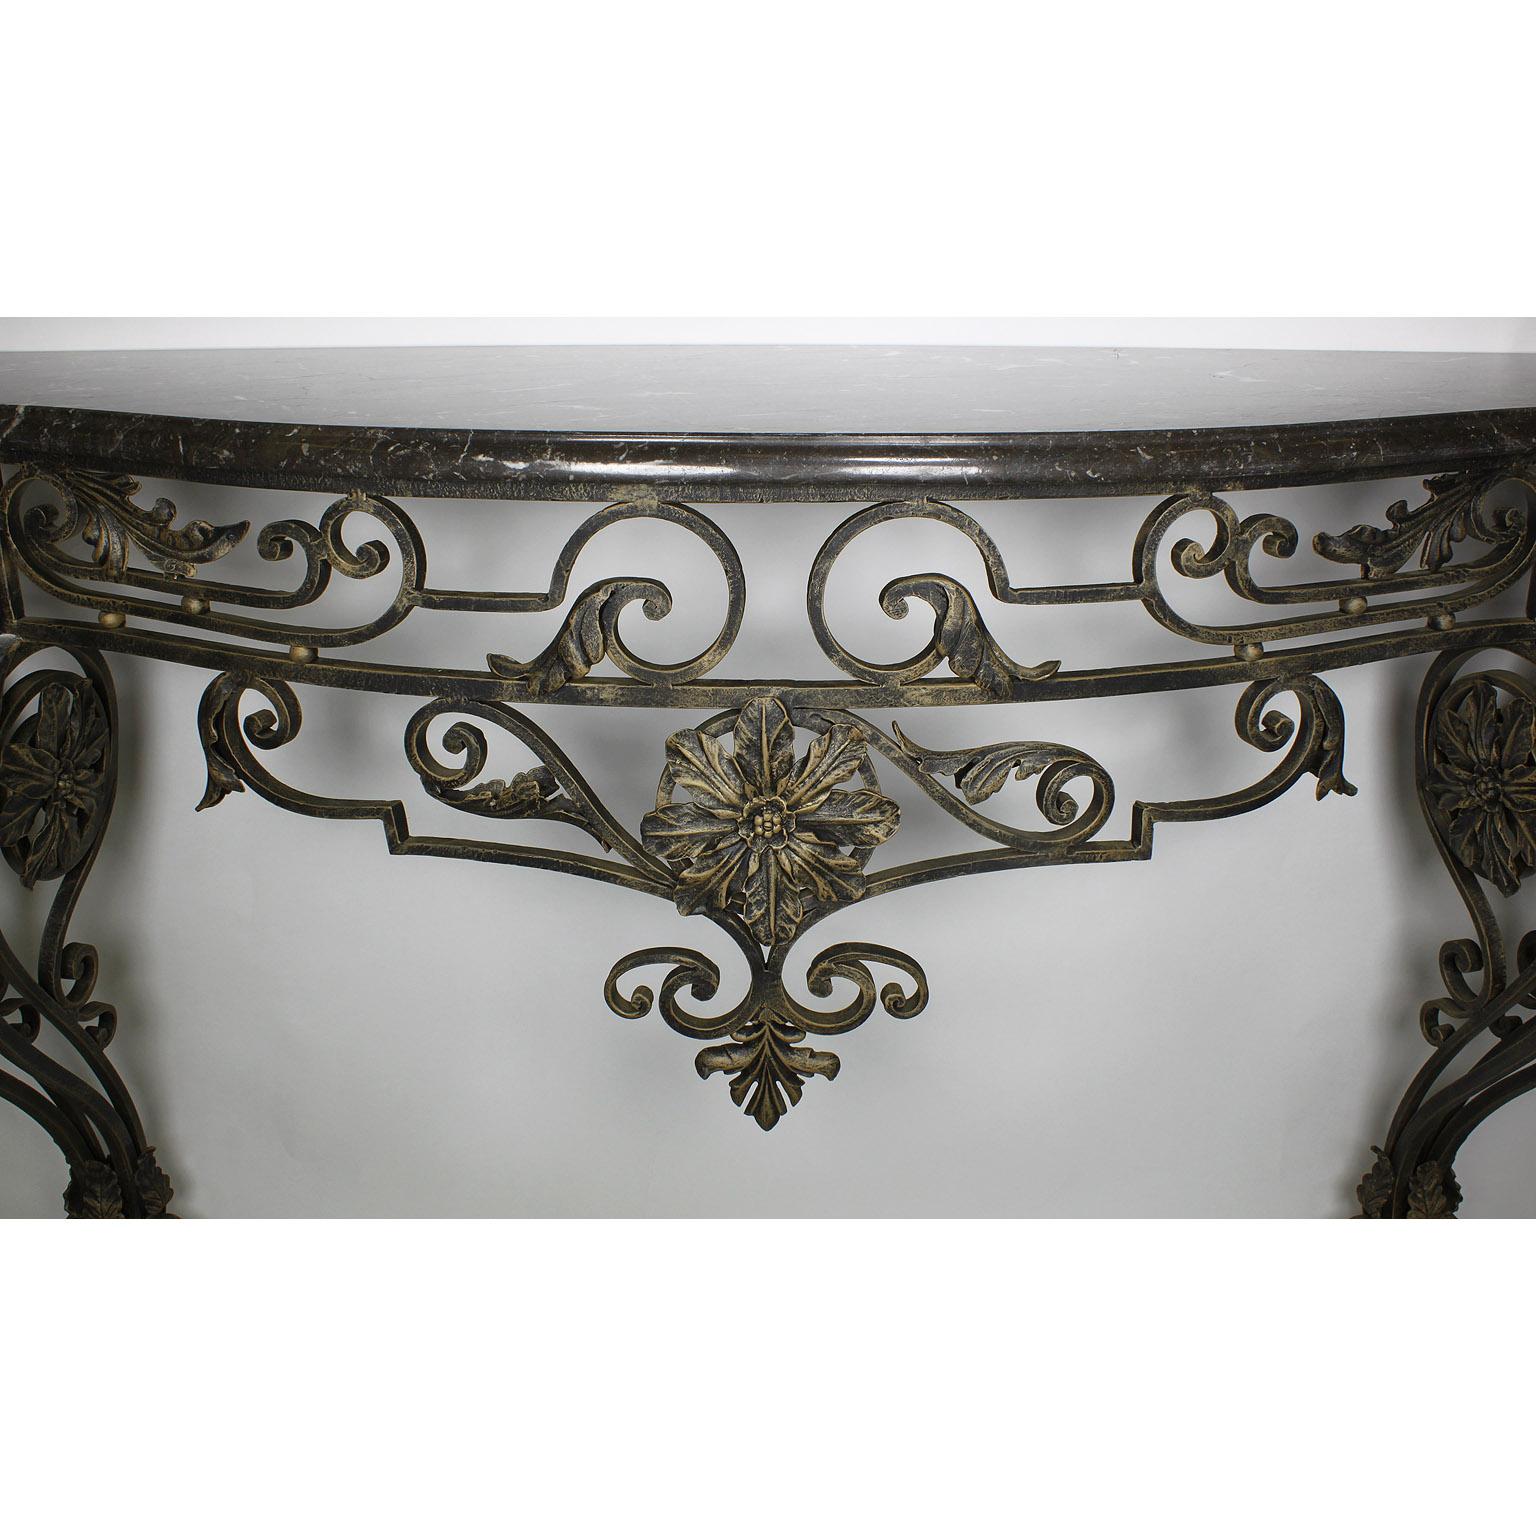 A Large French Louis XV Style Wrought Iron Wall Mounting Console with Marble Top. The ornately scrolled iron frame surmounted with floral decorations and fitted with a veined grey marble top. Circa: 20th Century

Height: 39 3/4 inches (101